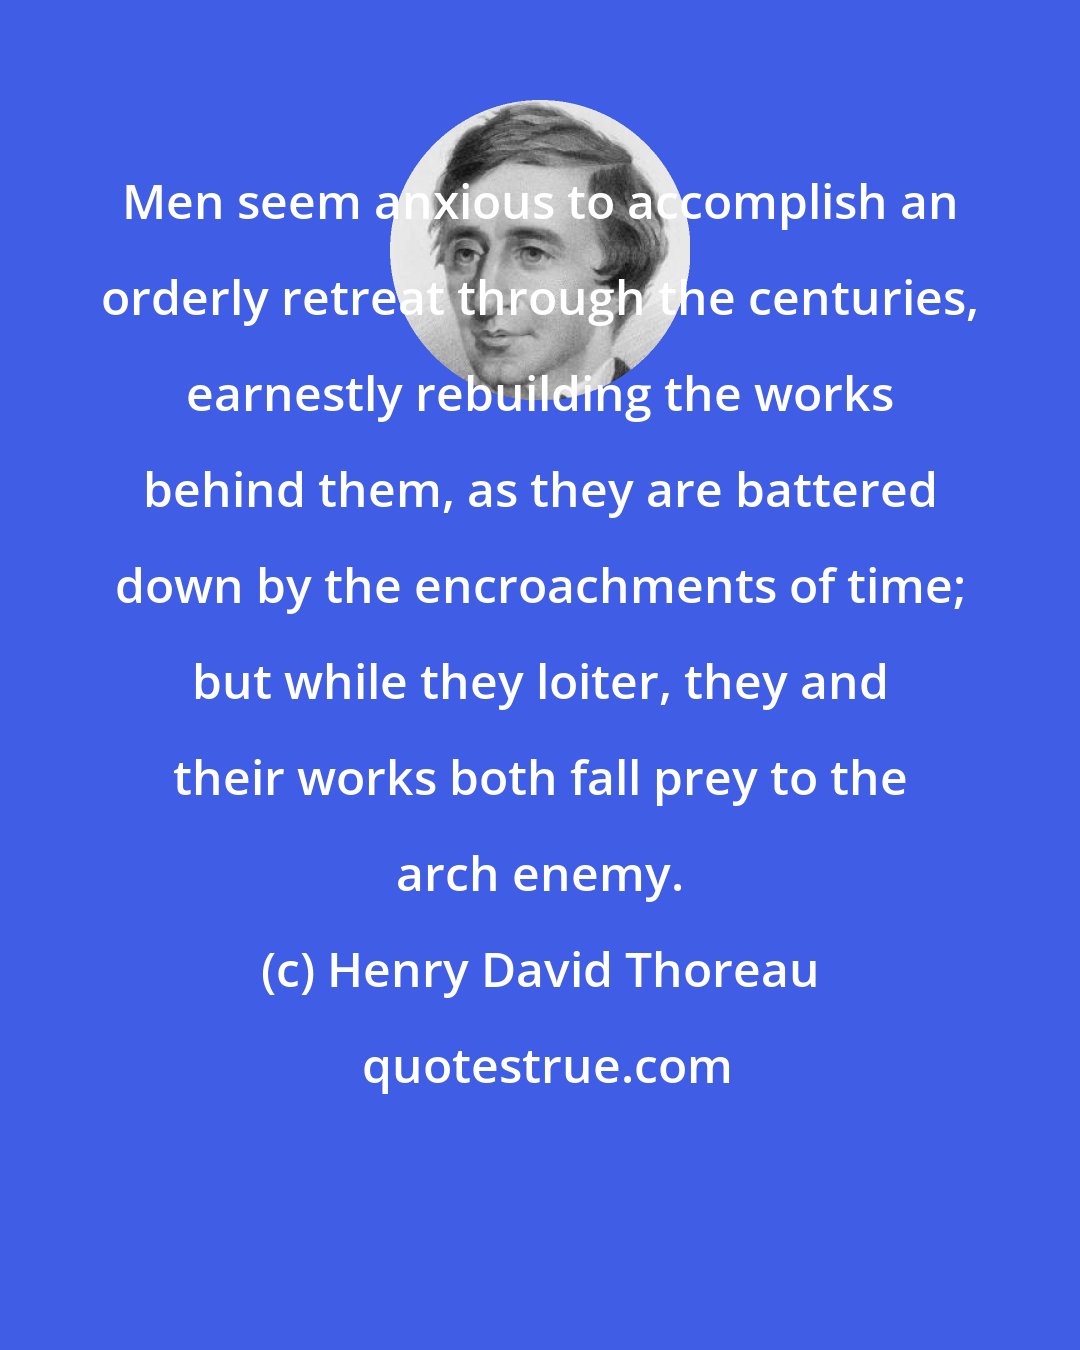 Henry David Thoreau: Men seem anxious to accomplish an orderly retreat through the centuries, earnestly rebuilding the works behind them, as they are battered down by the encroachments of time; but while they loiter, they and their works both fall prey to the arch enemy.